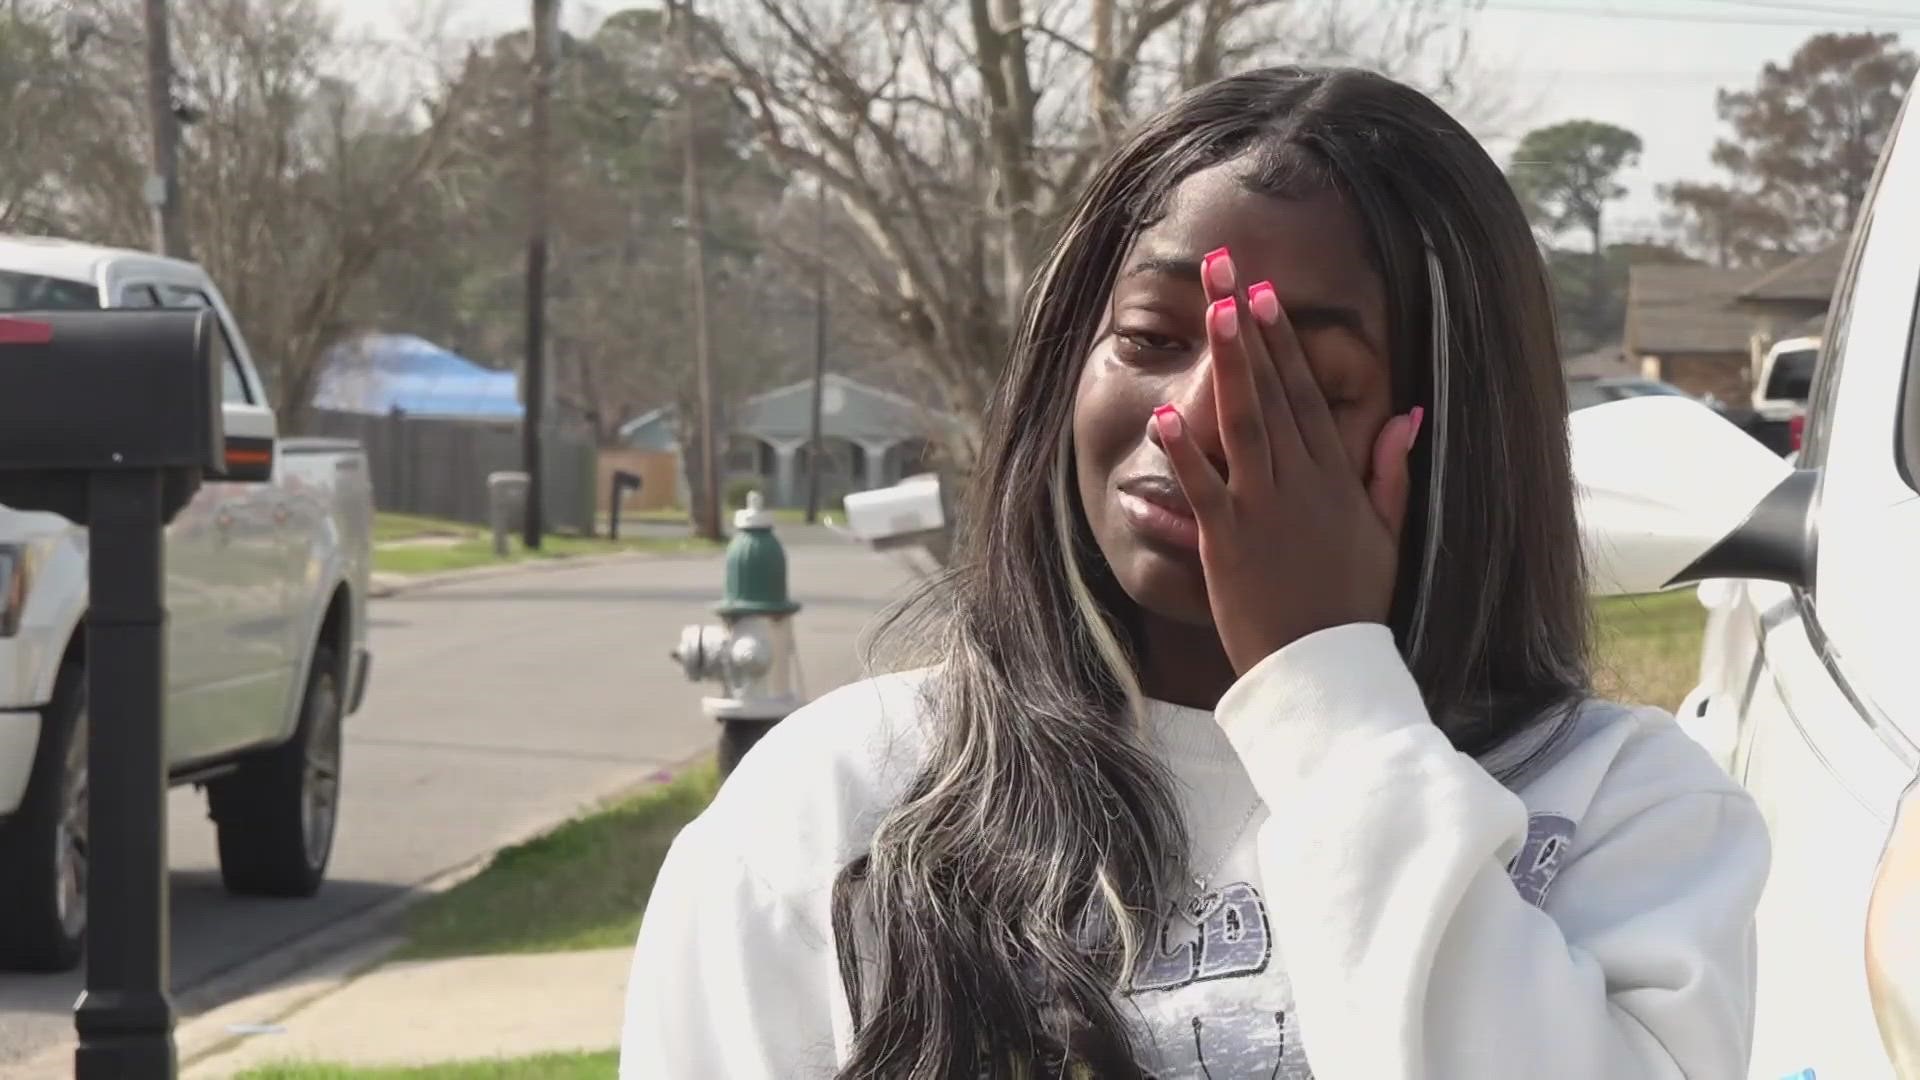 The best friend of 15-year-old Kennedi Belton of Warren Easton tearfully remembered her friend, lost to a gunshot this weekend.